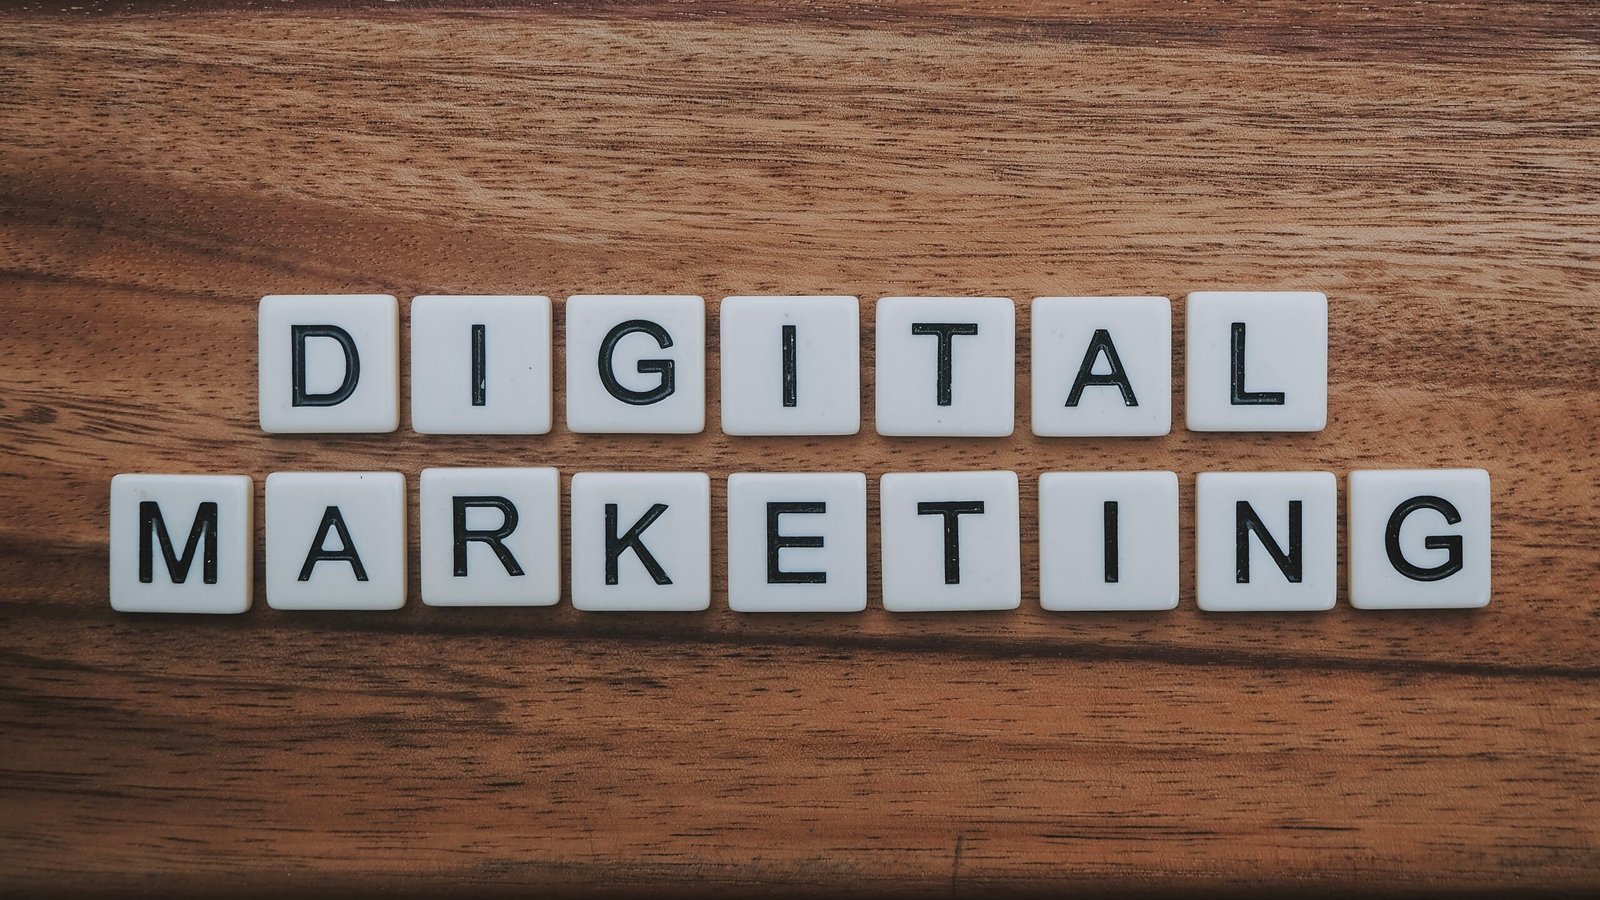 Digital Marketing in Gurgaon: Advertising in the Mobile-First Era